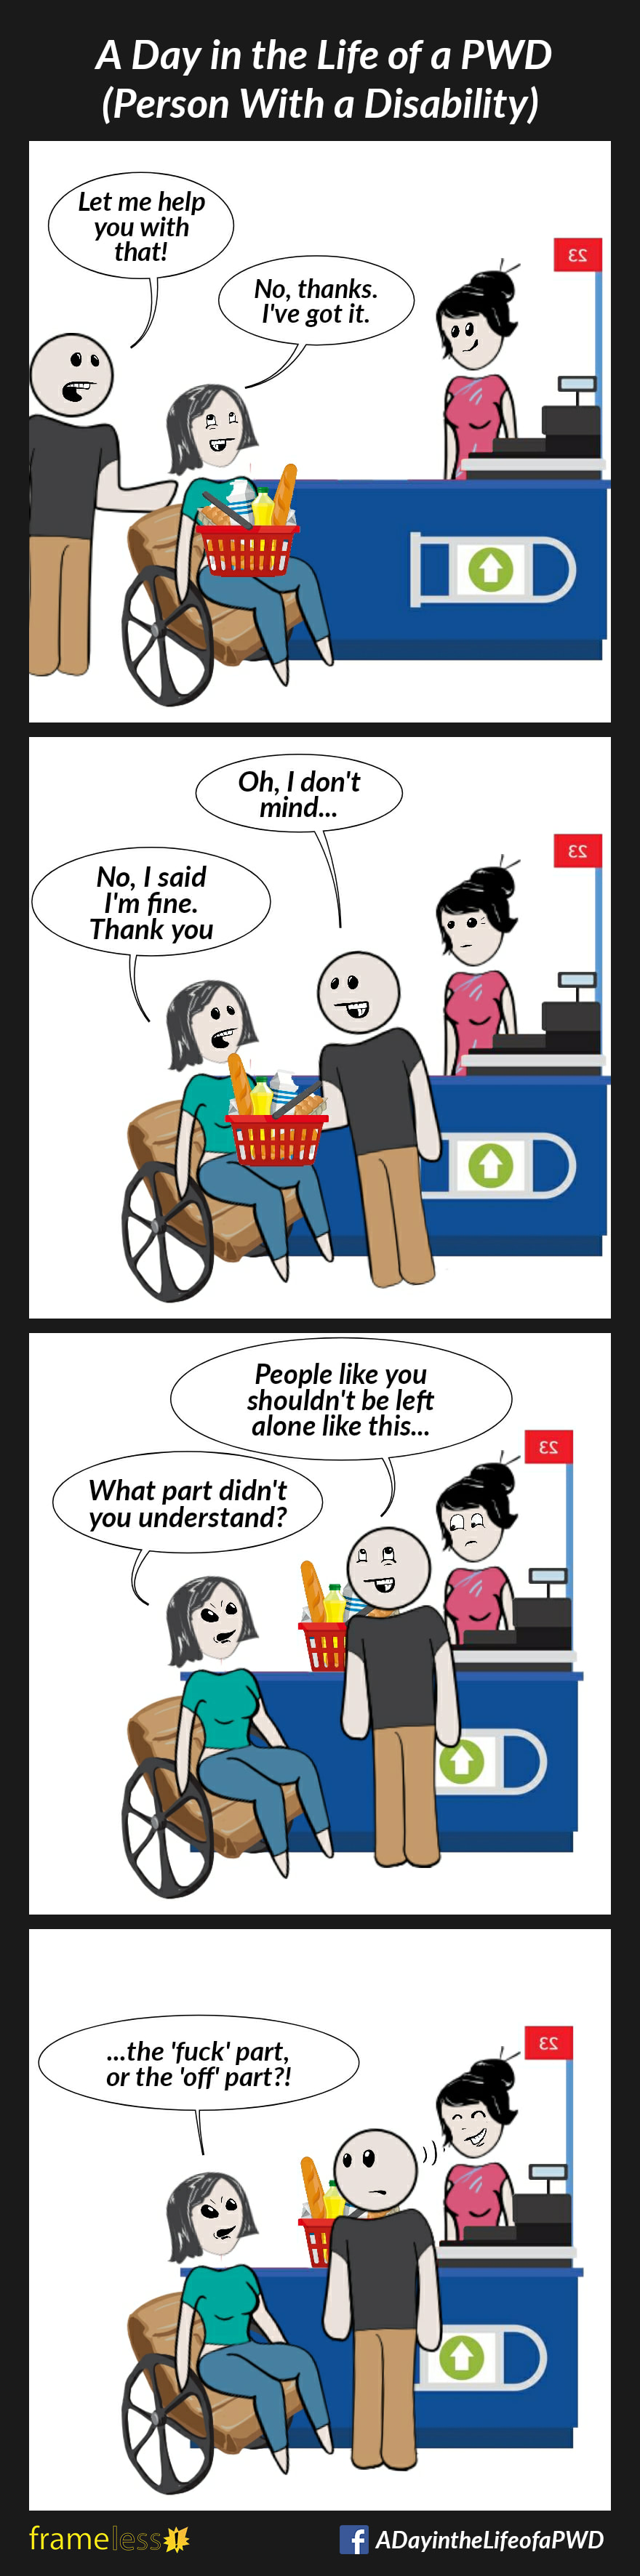 COMIC STRIP 
A Day in the Life of a PWD (Person With a Disability) 

Frame 1:
A woman in a wheelchair with a full grocery basket on her lap pulls up to a check out counter. A man behind her in line approaches. 
MAN: Let me help you with that!
WOMAN (smiling): No, thanks. I've got it.

Frame 2:
MAN (grabbing her basket): Oh, I don't mind...
WOMAN: No, I said I'm fine. Thank you.

Frame 3:
MAN (putting basket on counter): People like you shouldn't be left alone like this...
WOMAN (angry): What part didn't you understand?

Frame 4:
WOMAN: ...the 'fuck' part, or the 'off' part?!